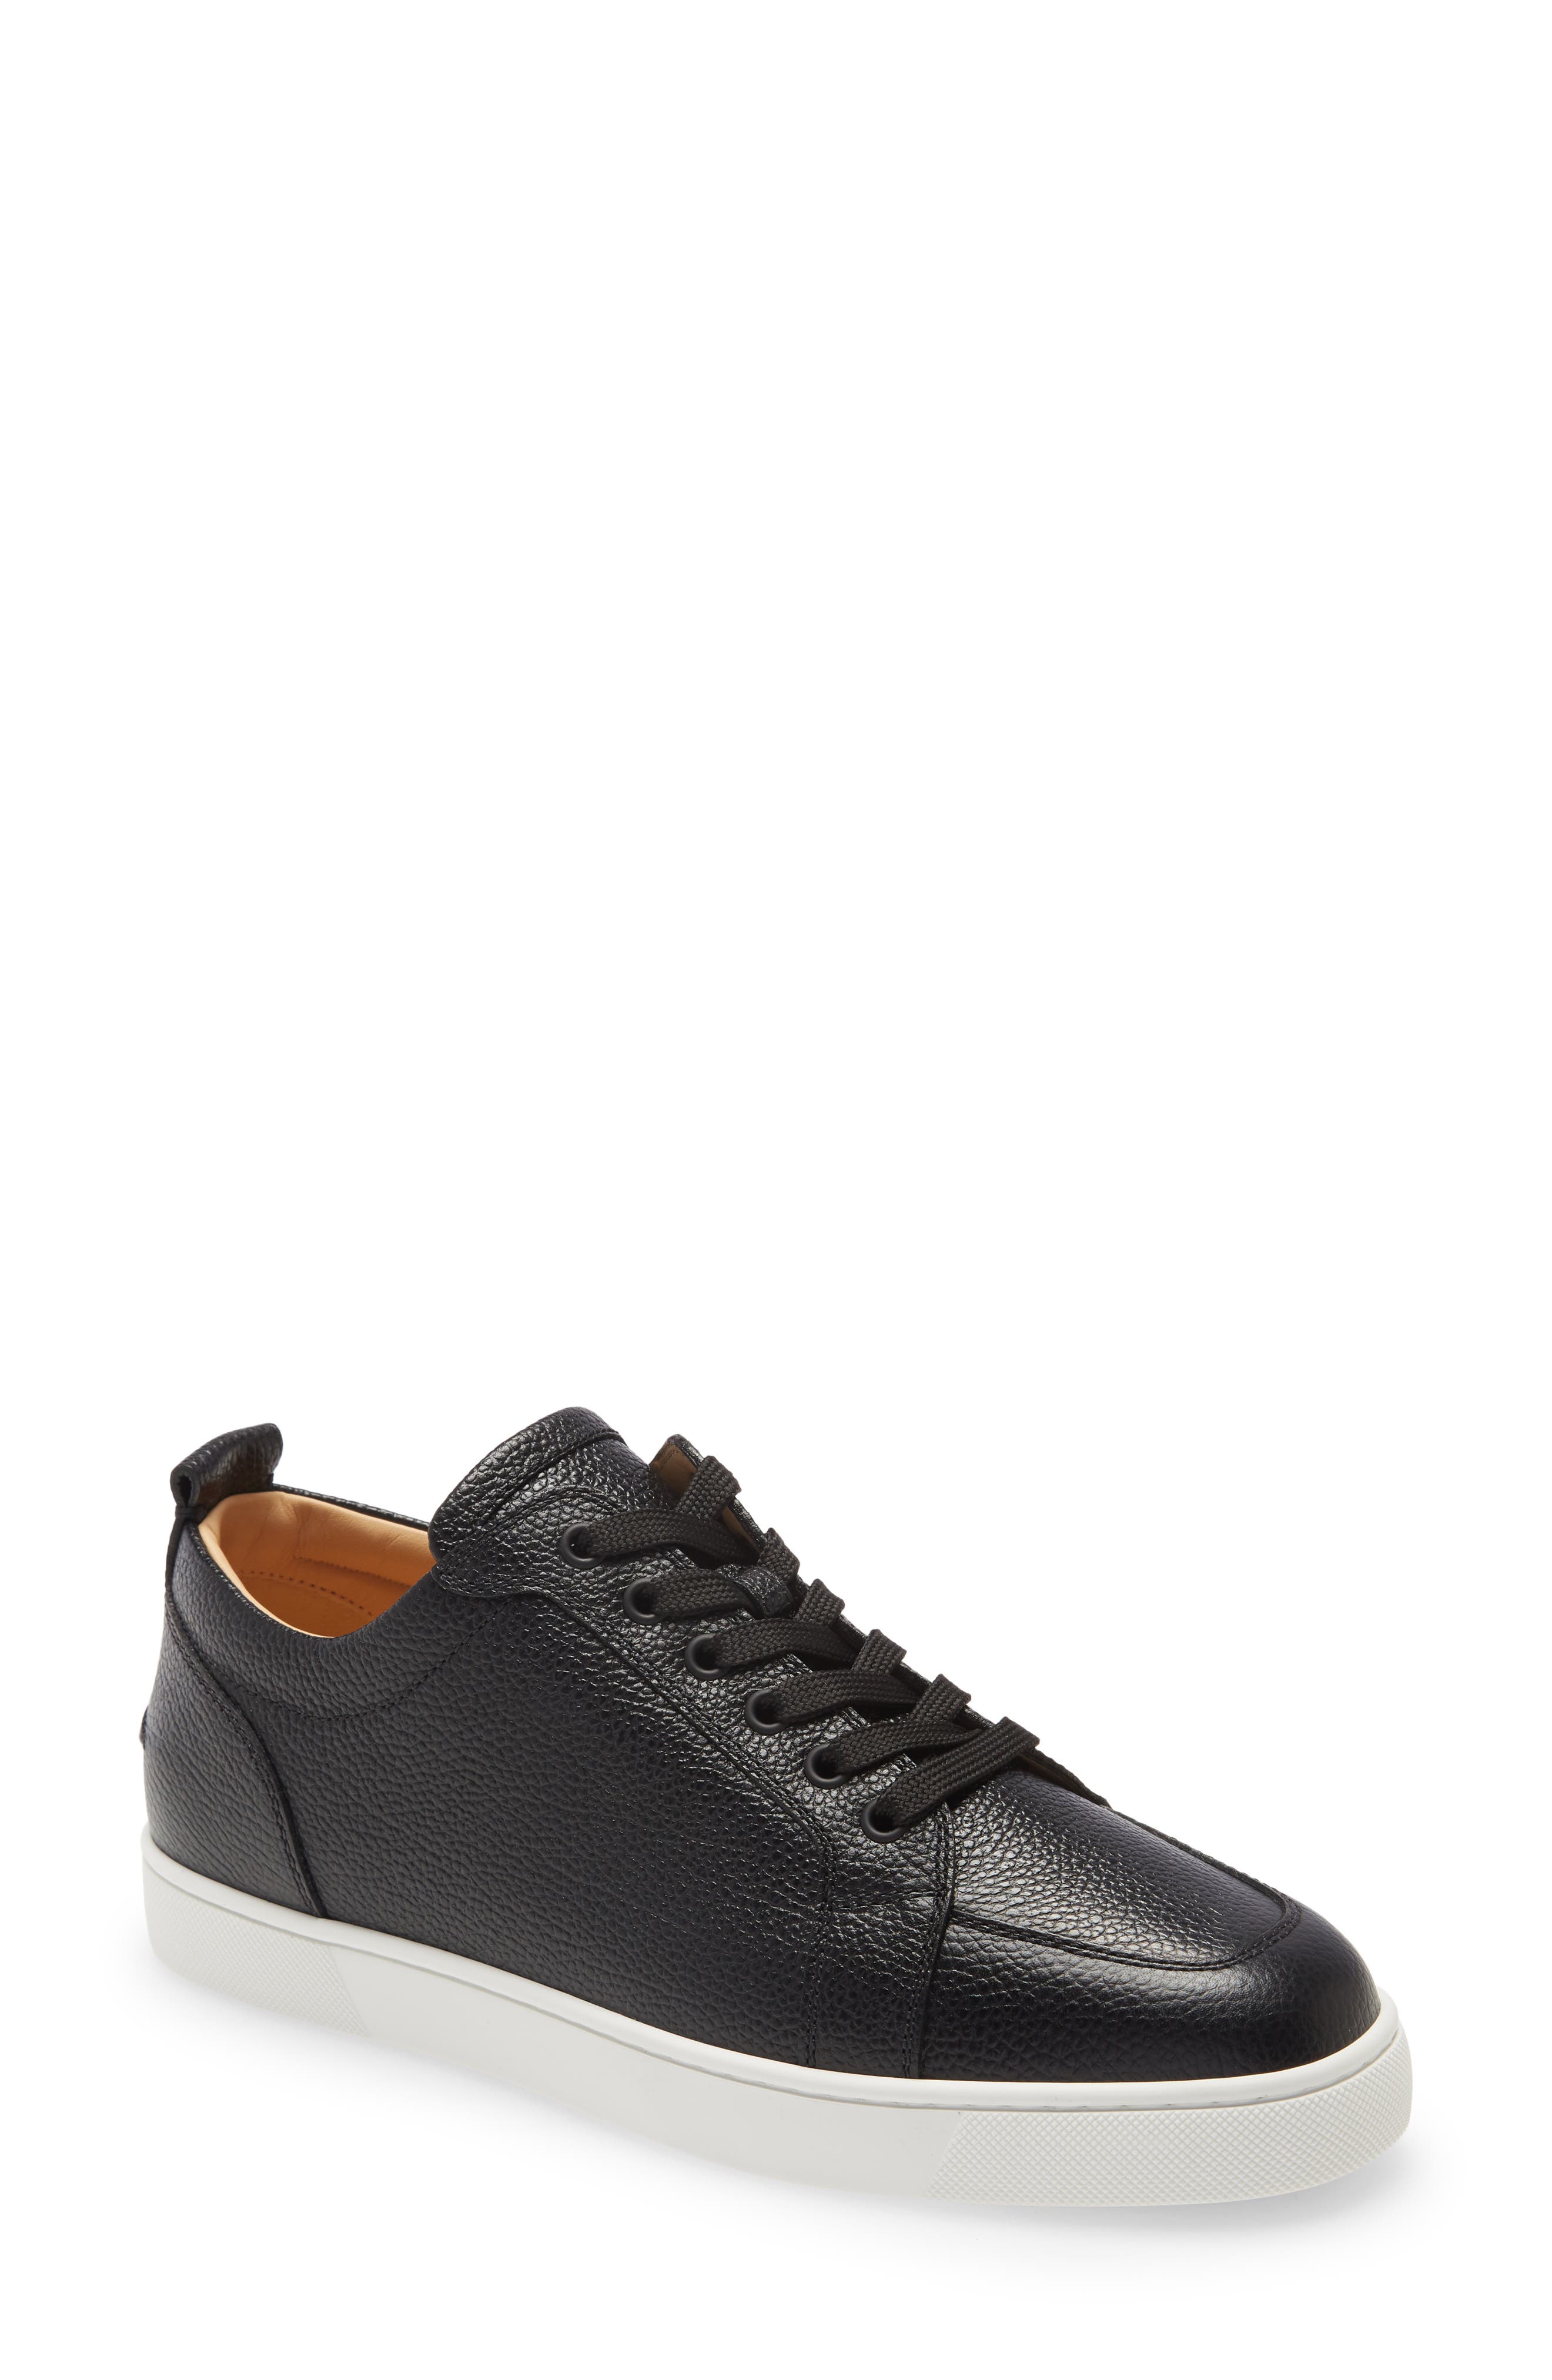 mens christian louboutin trainers